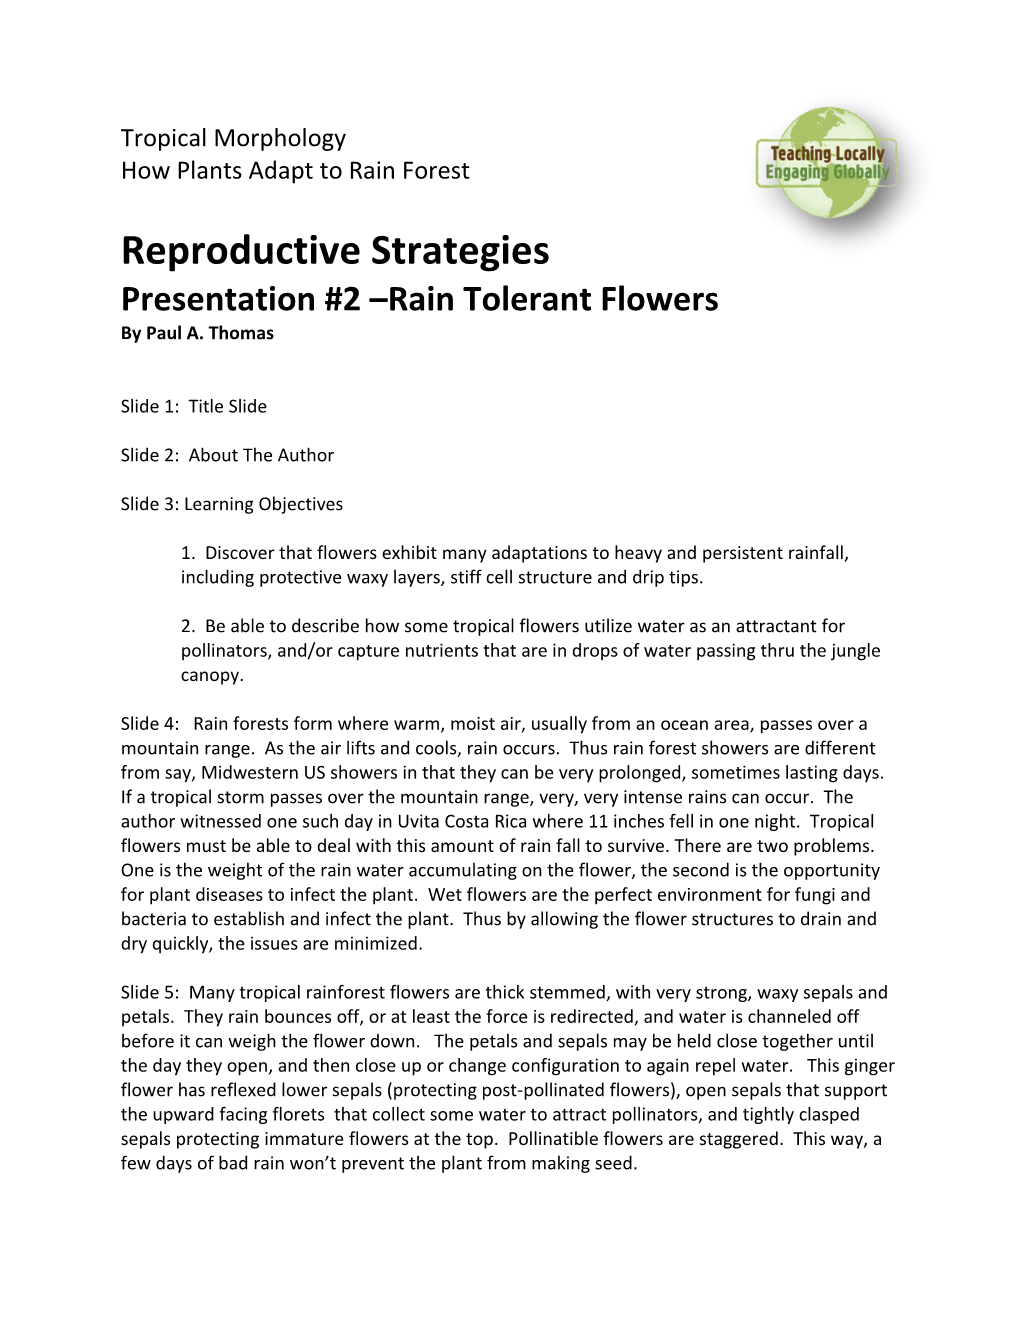 How Plants Adapt to Rain Forest s1